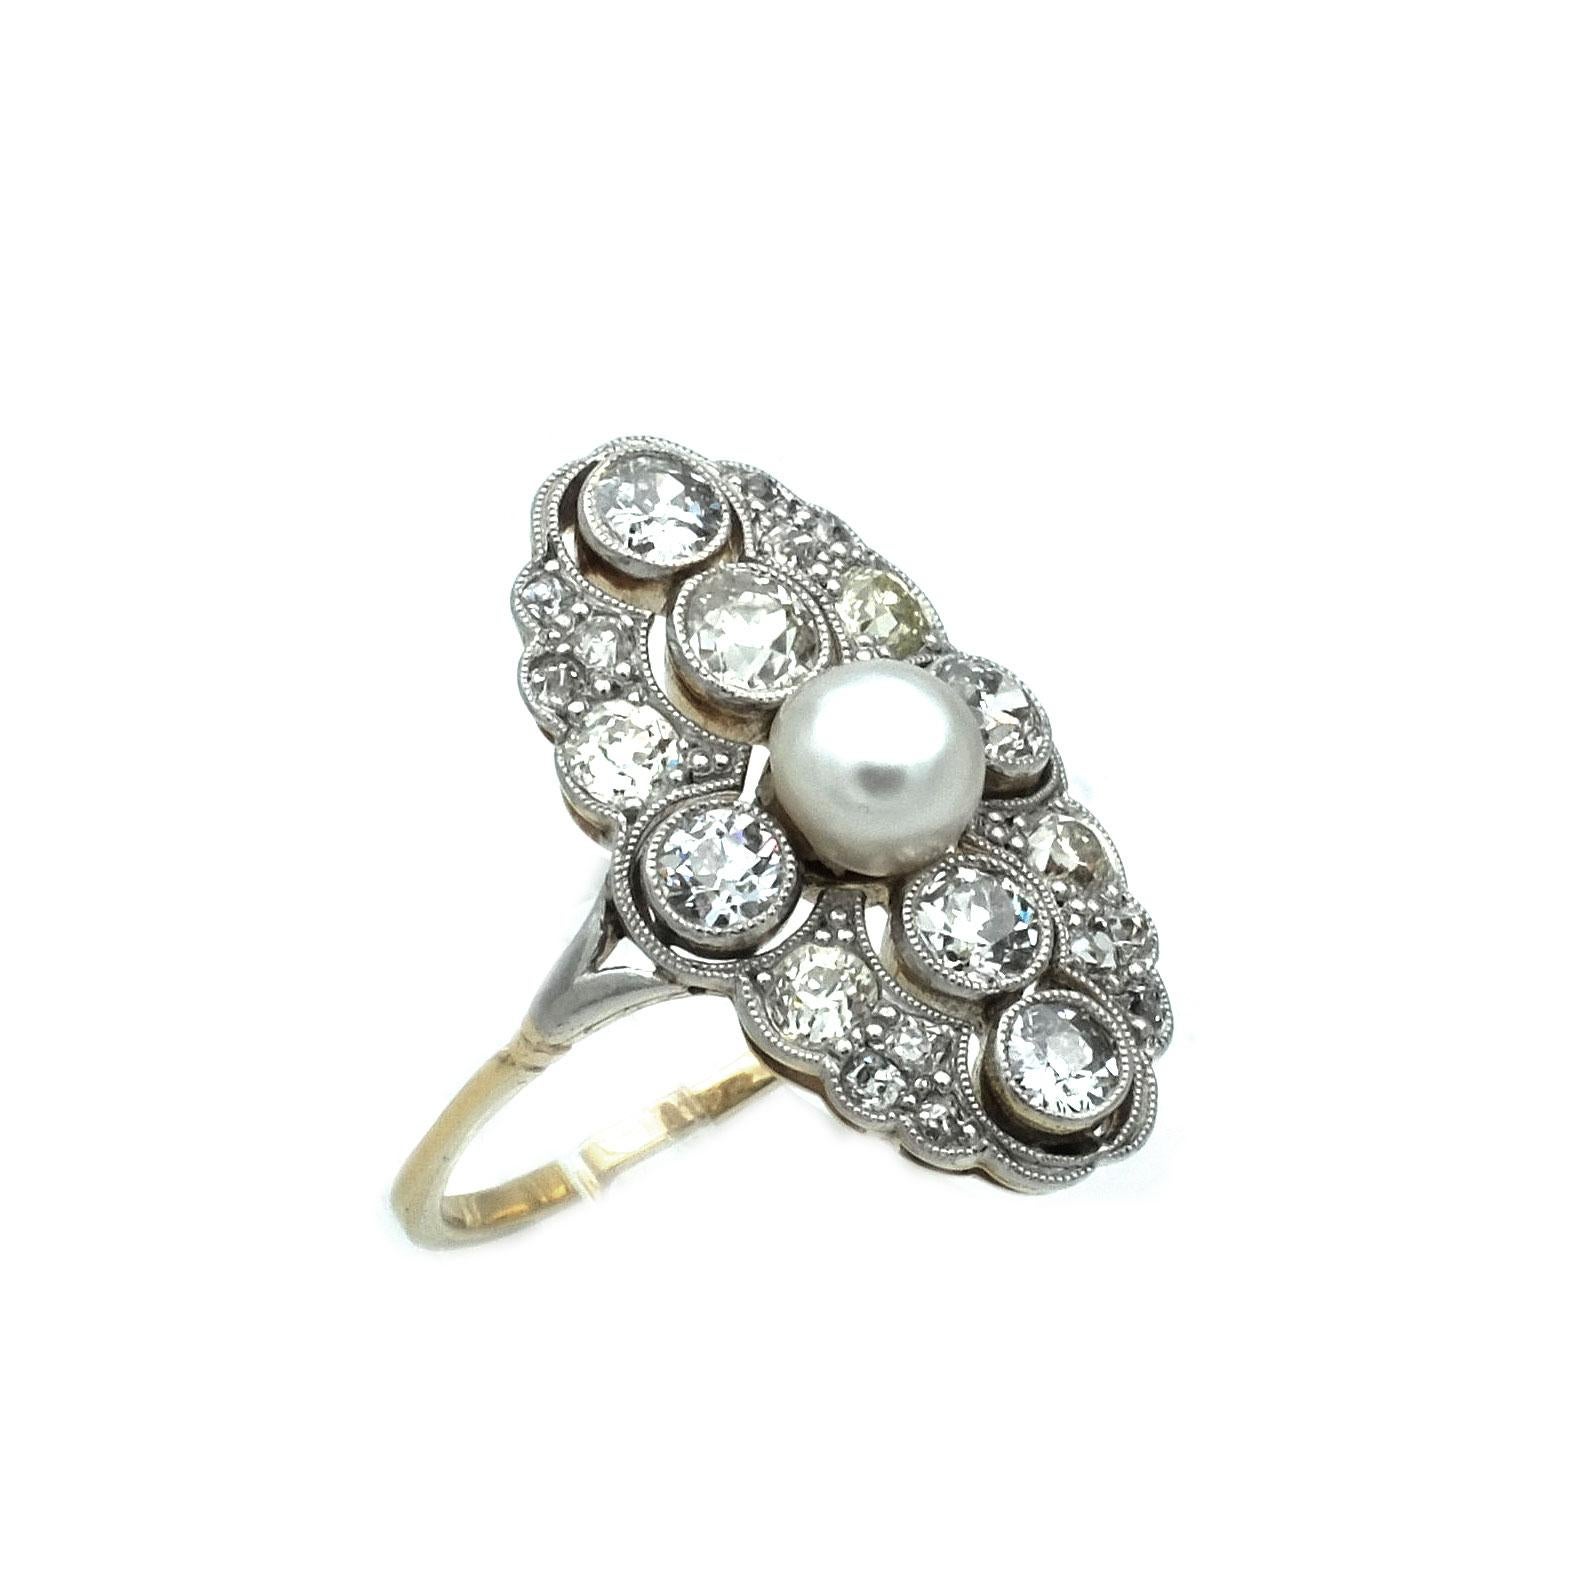 Art Deco 1.5 Carat Diamond Pearl Gold and Platinum Ring, circa 1915

Very elegant ring with an oval ring head, pierced, set with one natural pearl in the center surrounded by 6 larger diamonds in a bezel setting, the edges set with further diamonds